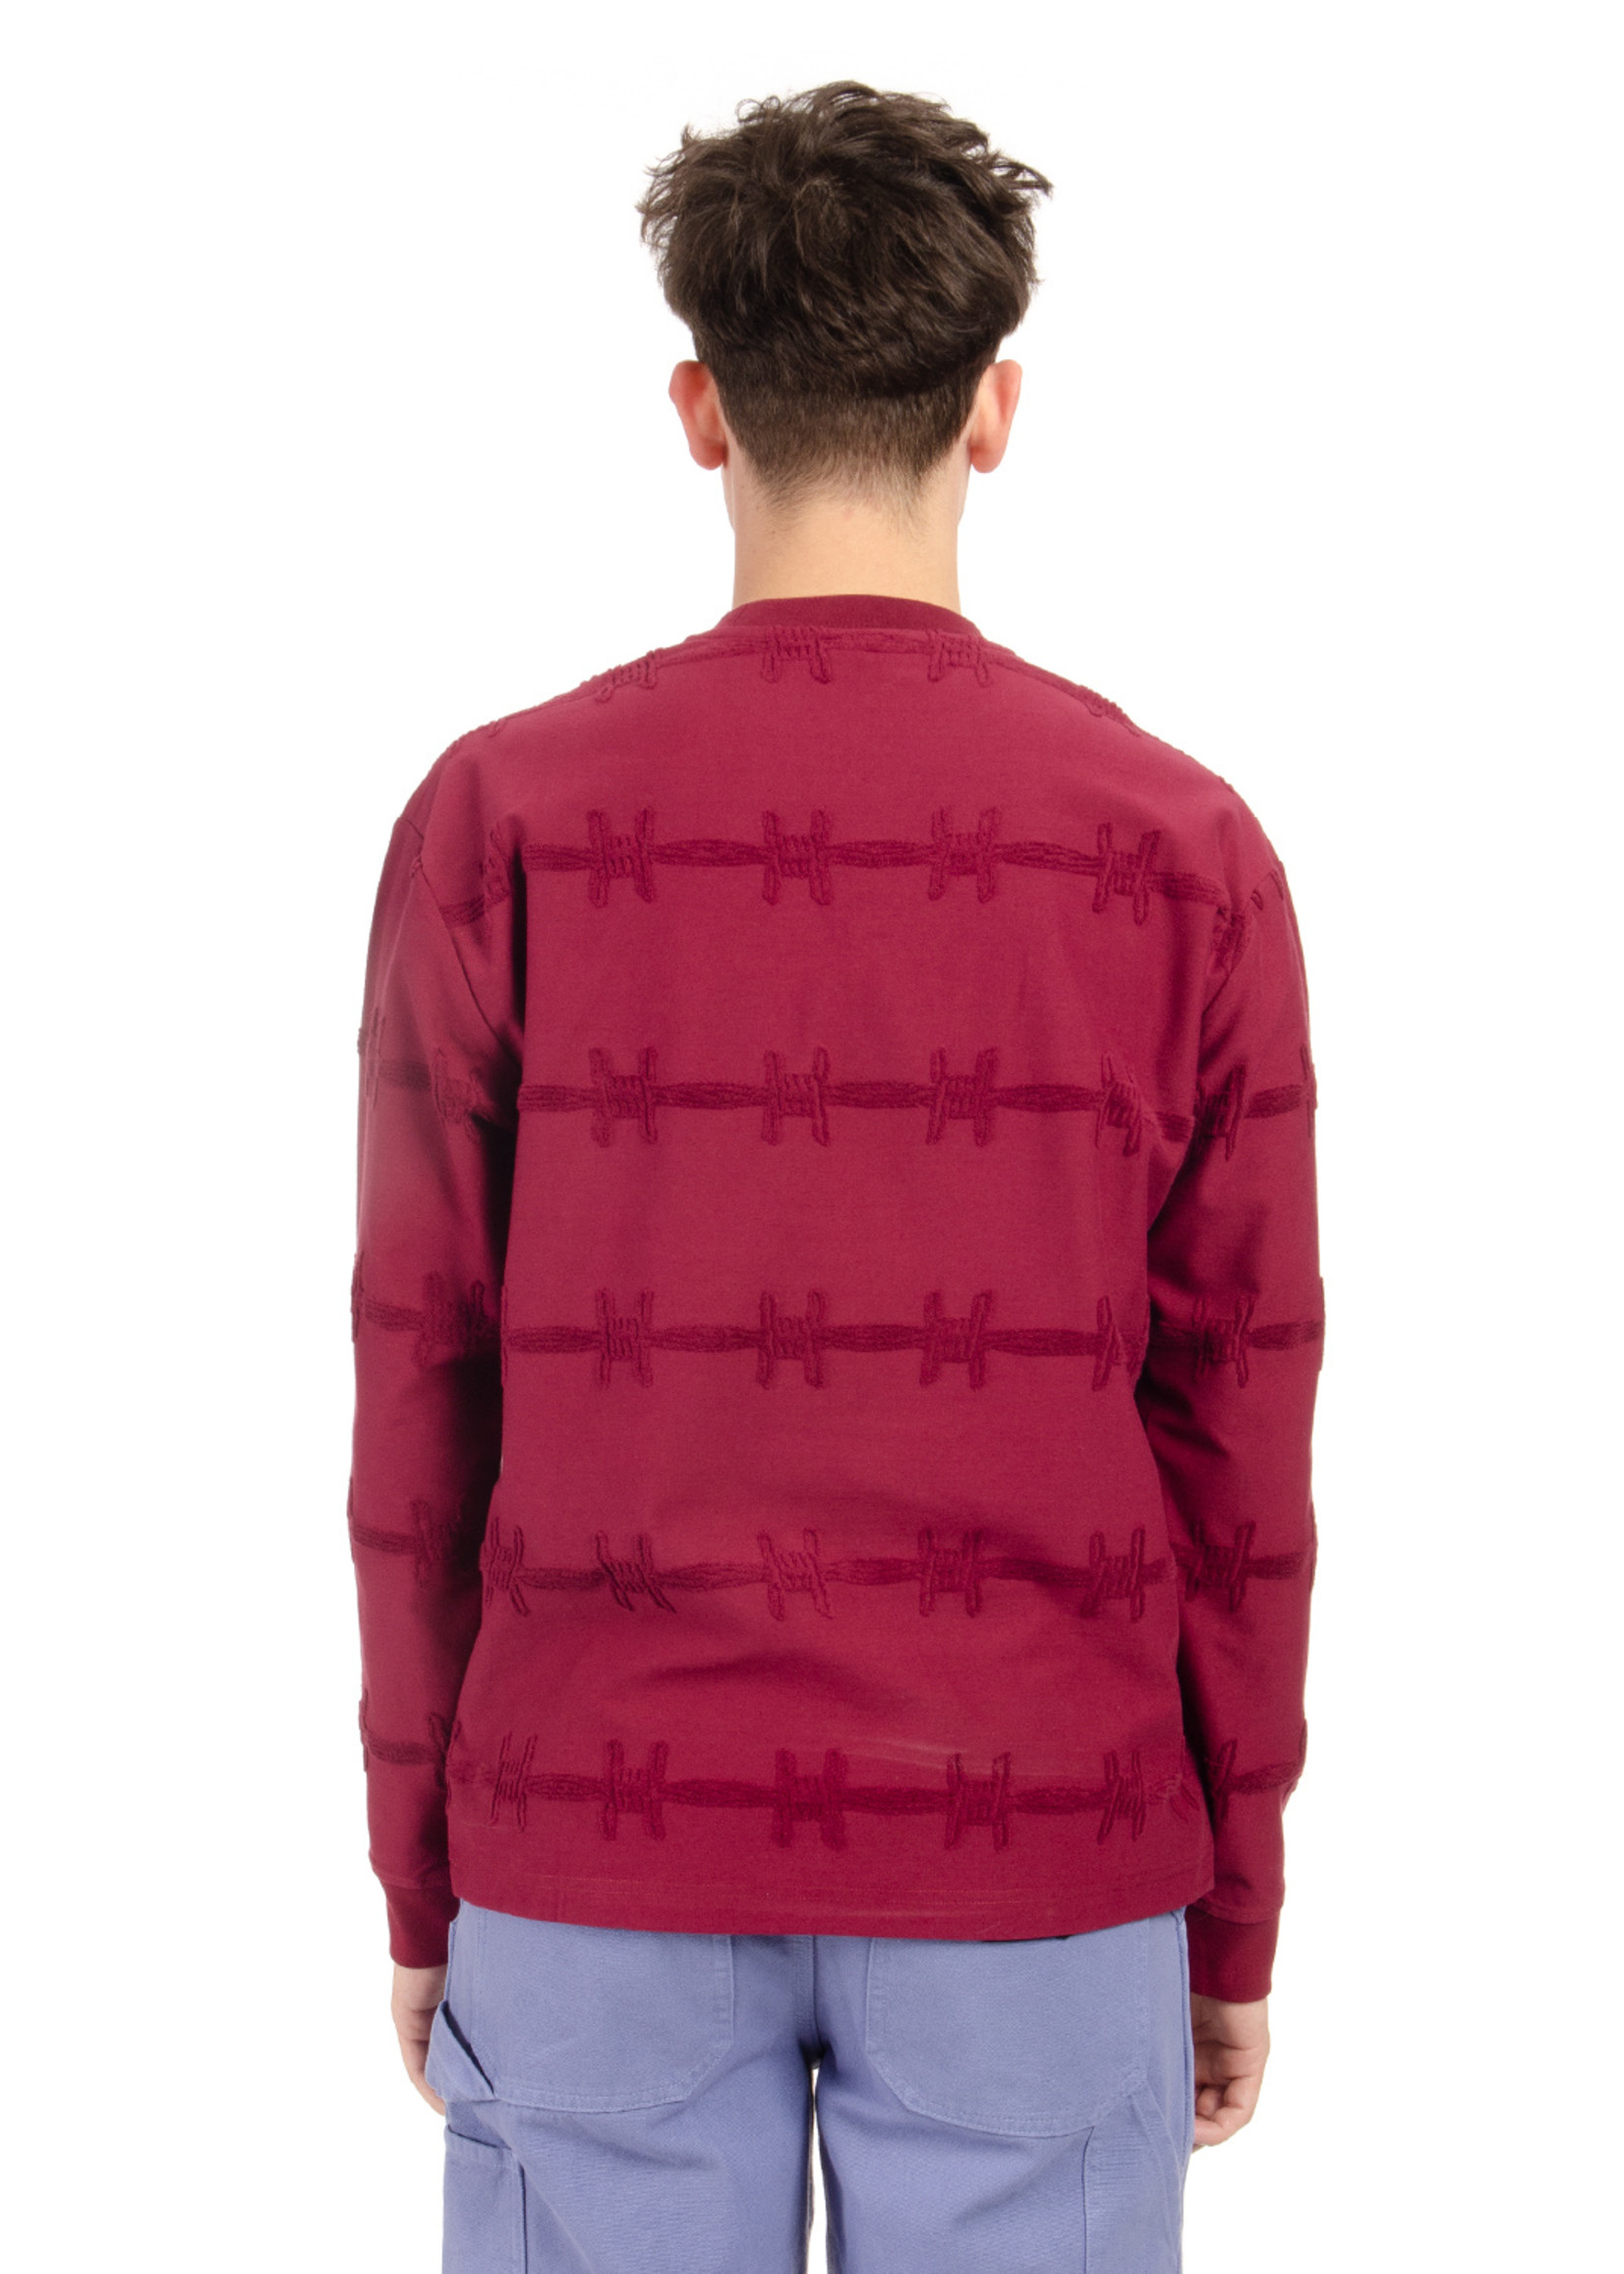 Brain Dead Barbed Wire Burnout Long Sleeve Shirt in Maroon